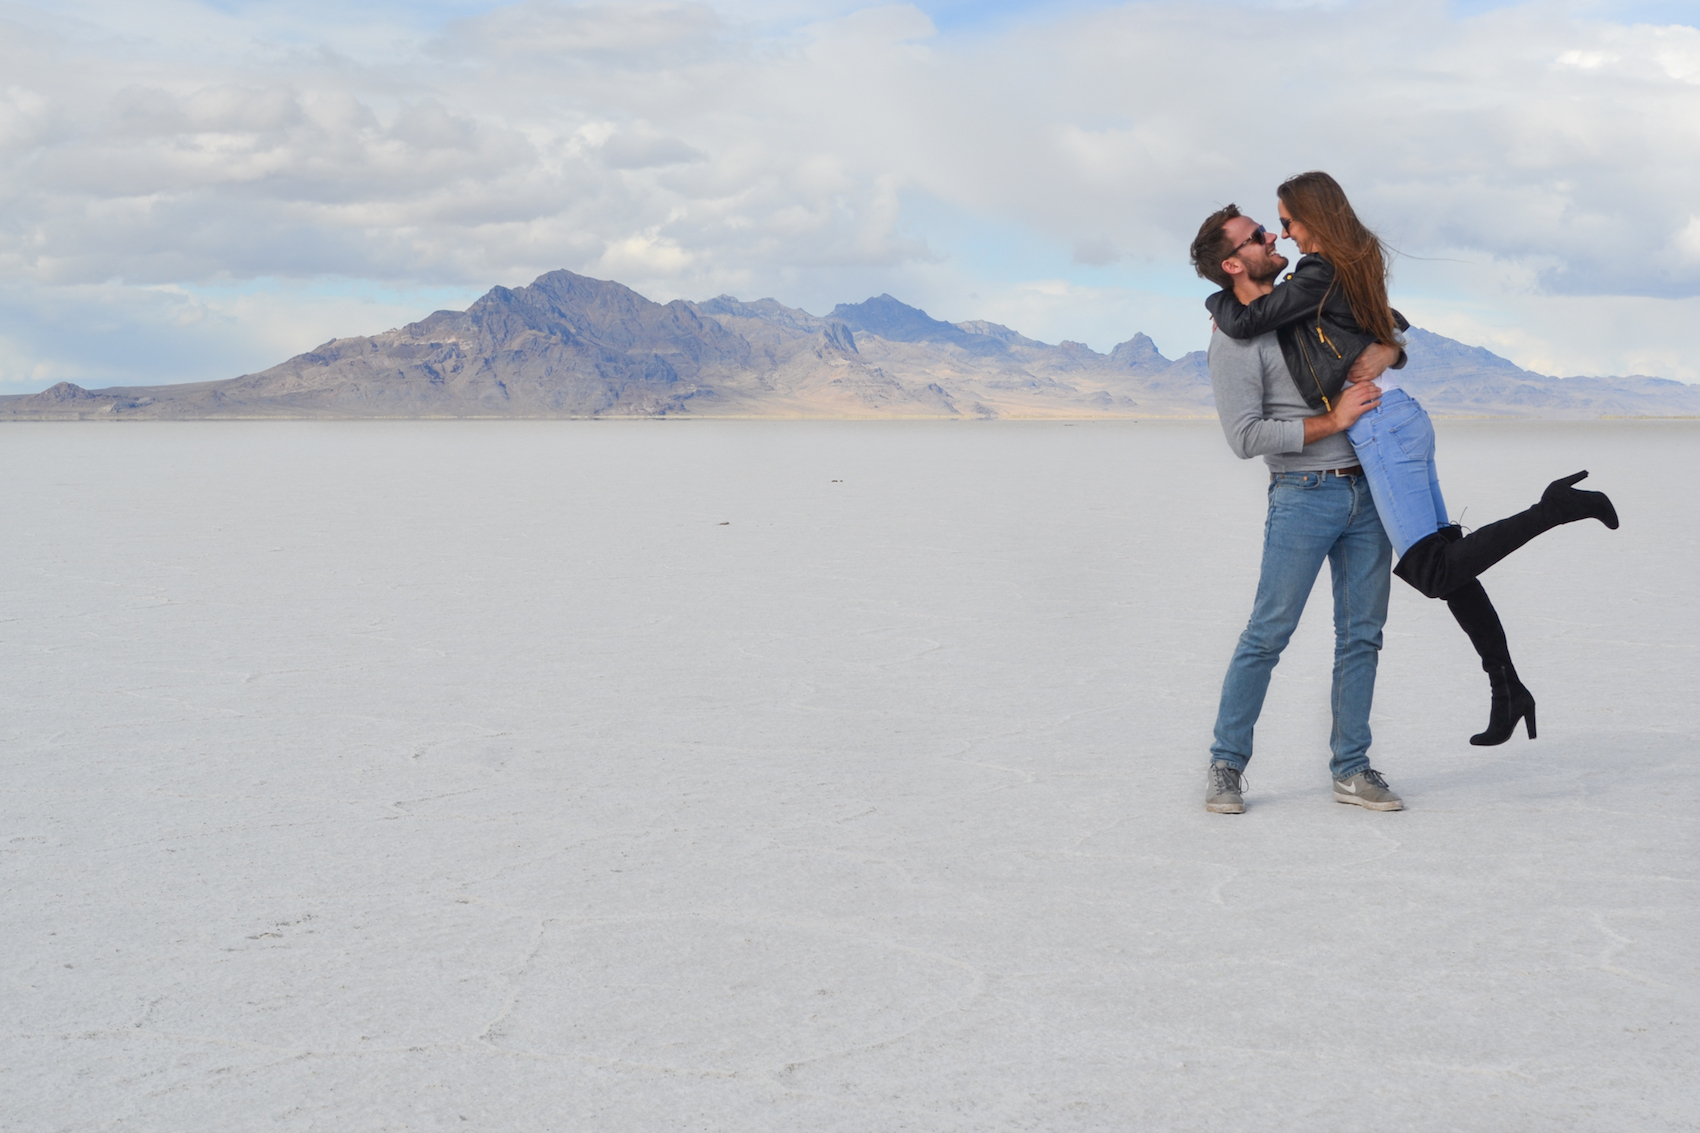 The Bonneville salt flats in Utah are a vast plain of crusted salt with beautiful mountains in the background.